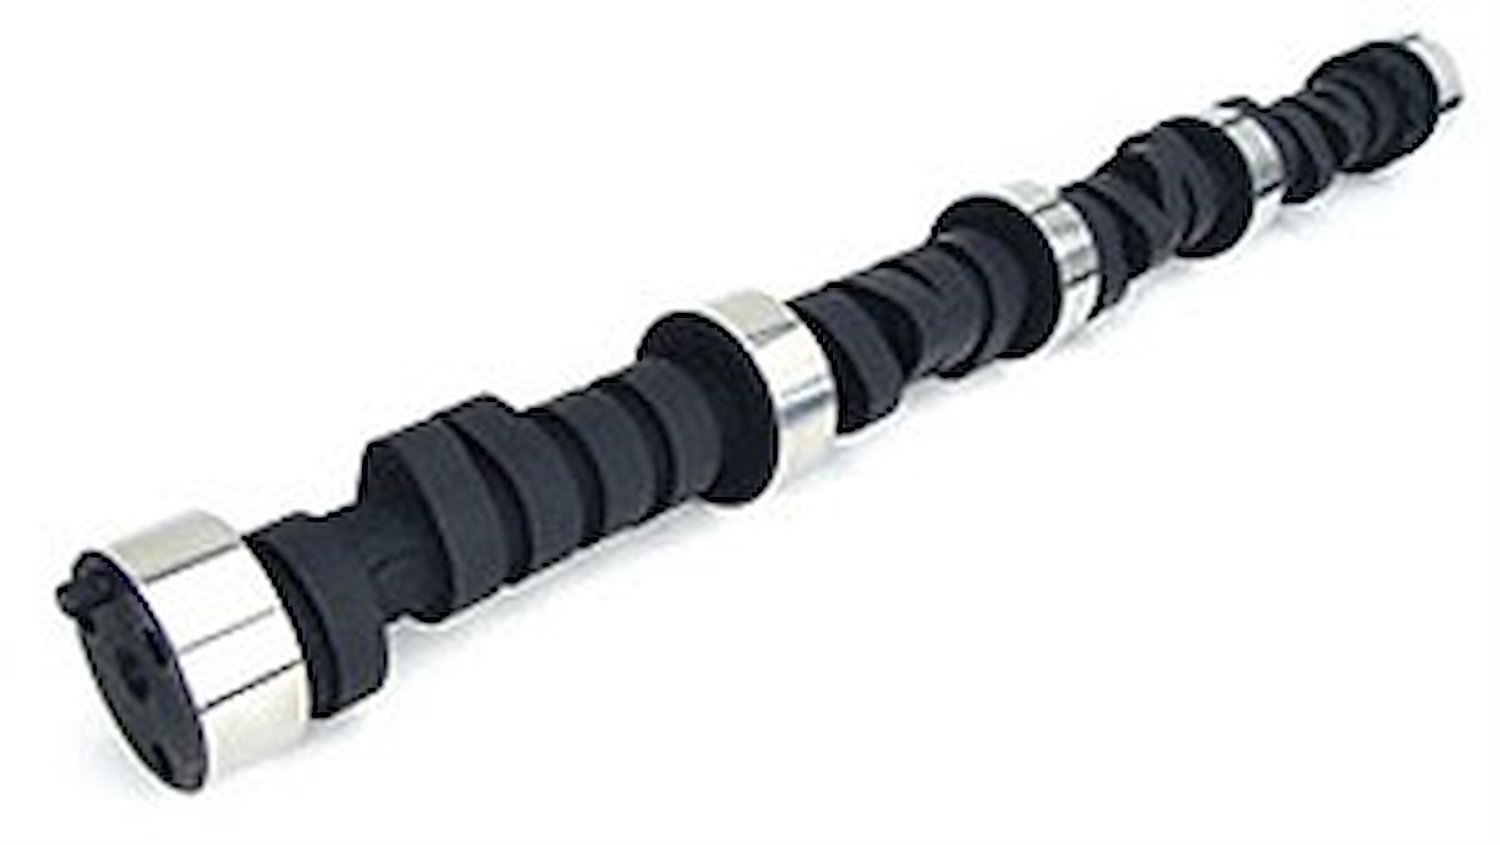 Xtreme Turbo Hydraulic Flat Tappet Camshaft Small Block Chevy 262-400 1955-98 Lift: .432"/.426"